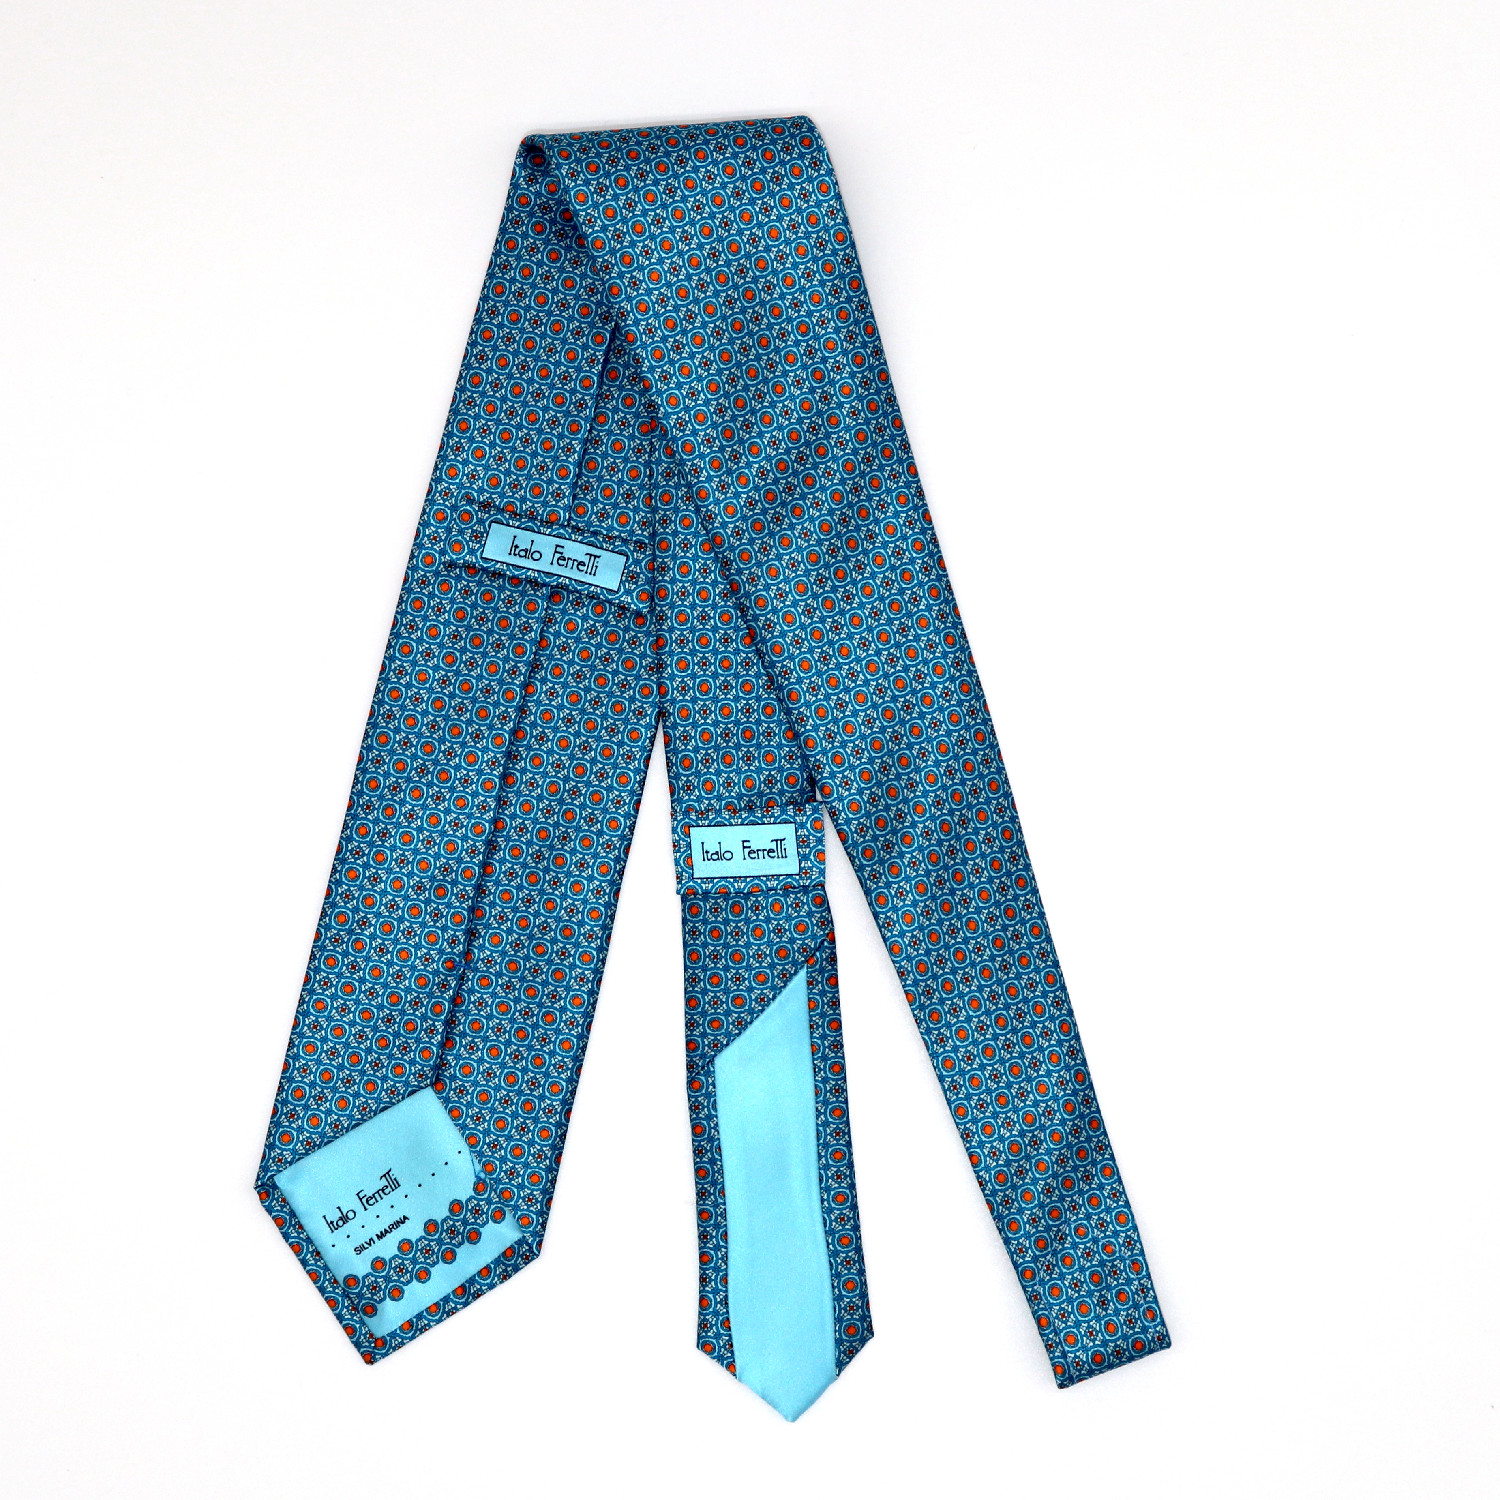 Classy custom tie, turquoise and red elegant micropattern, handmade in ...